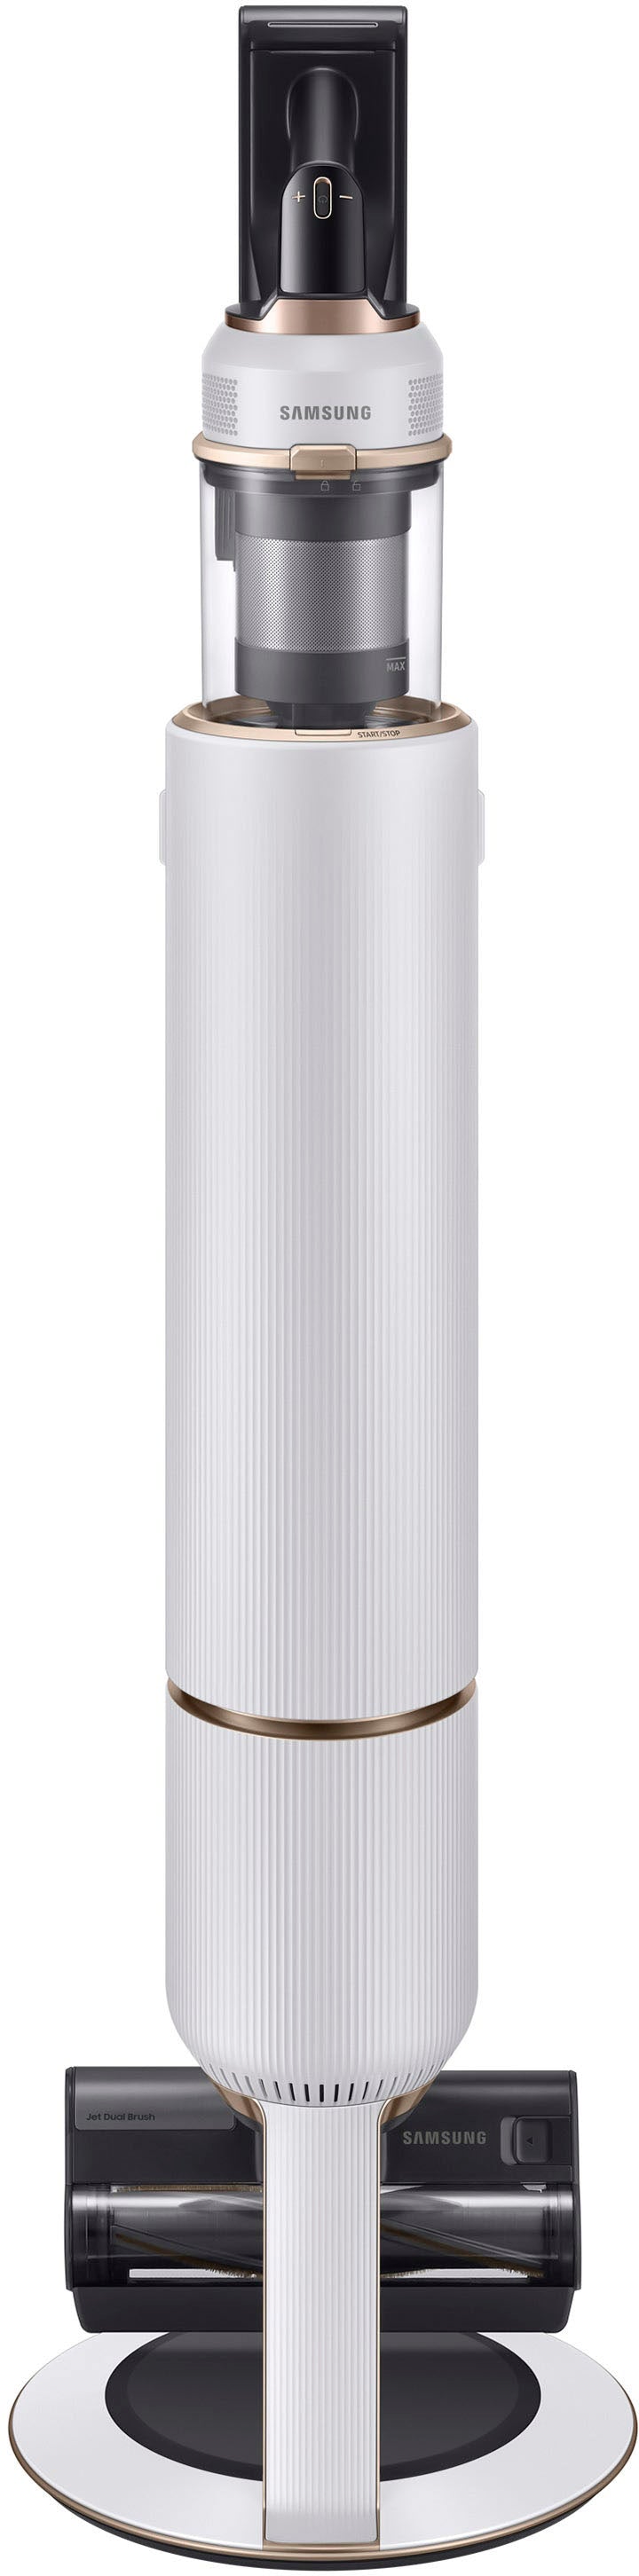 Samsung - Bespoke Jet™ Cordless Stick Vacuum with All-in-One Clean Station - Misty White_0